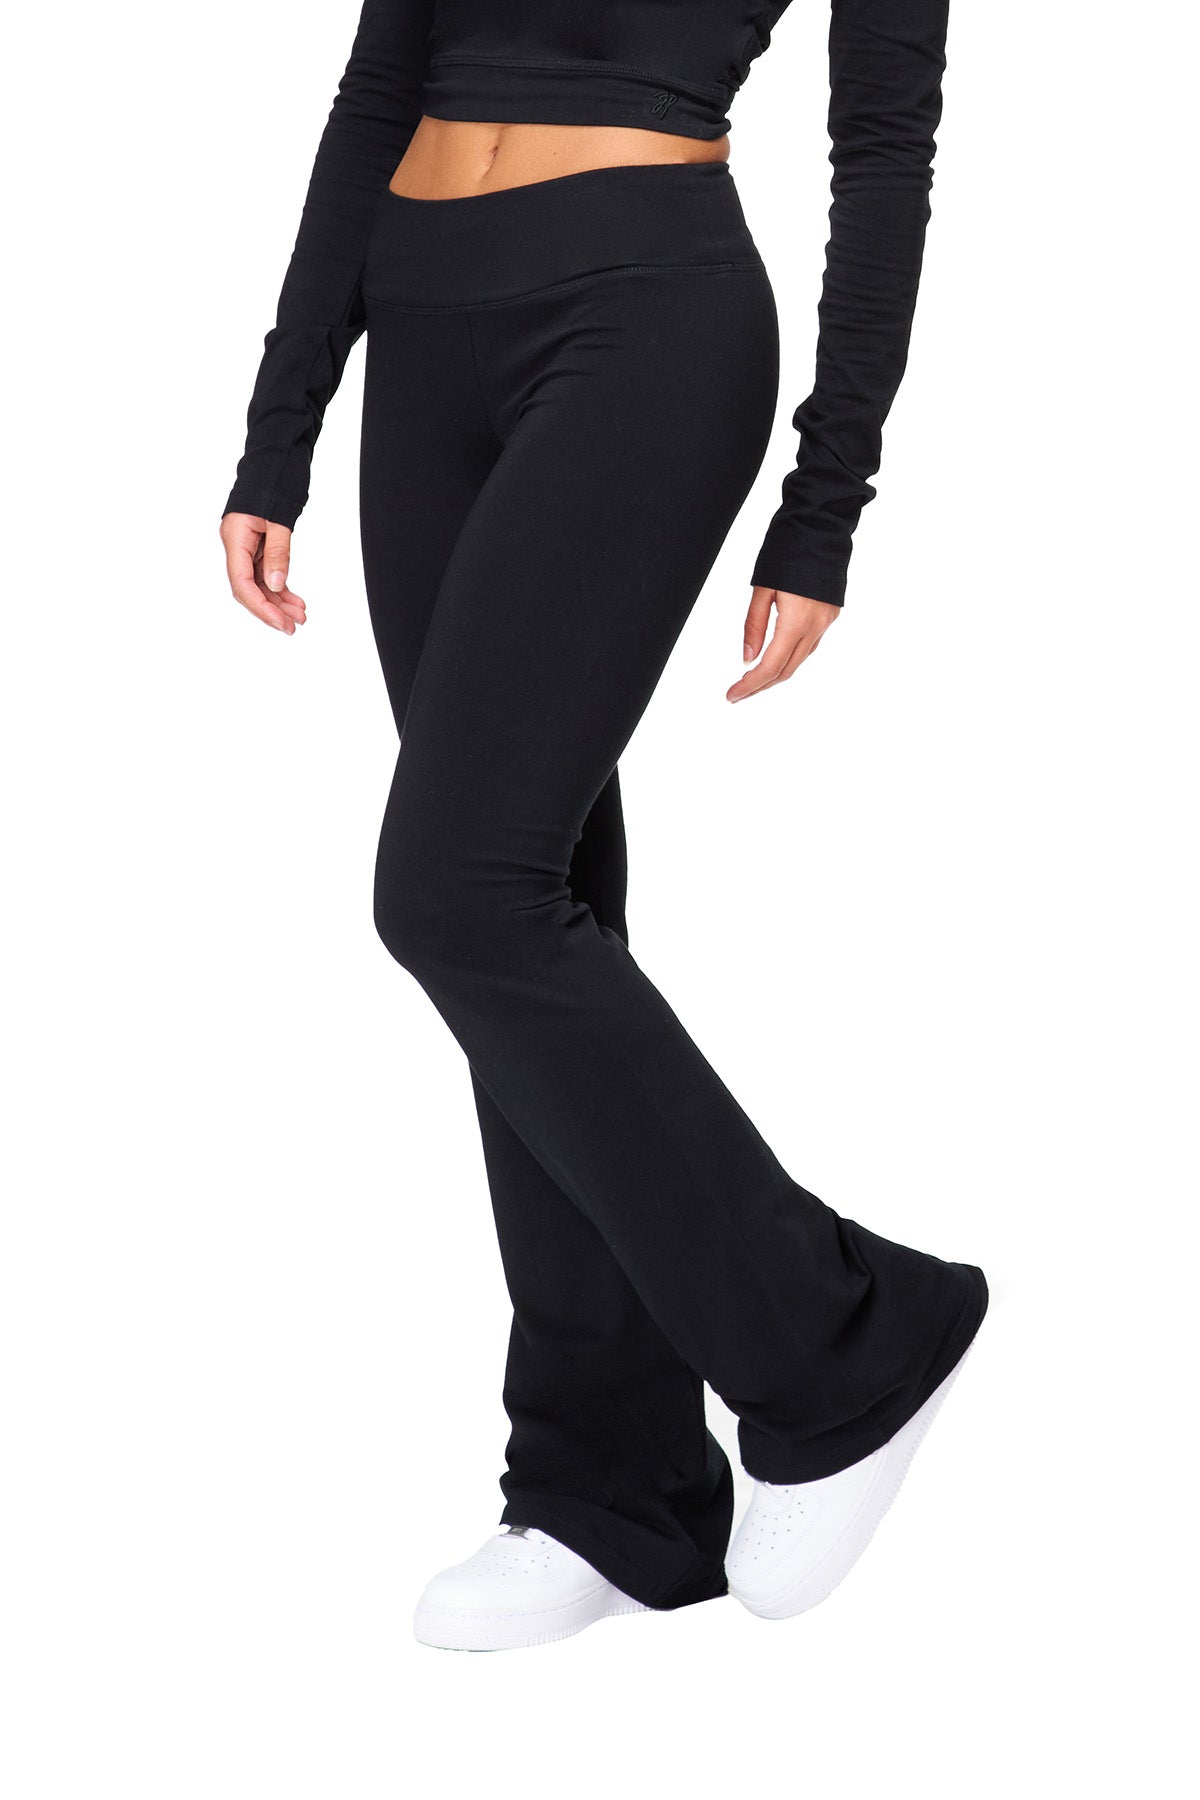 Tiana - Flared Pant with 3" Band